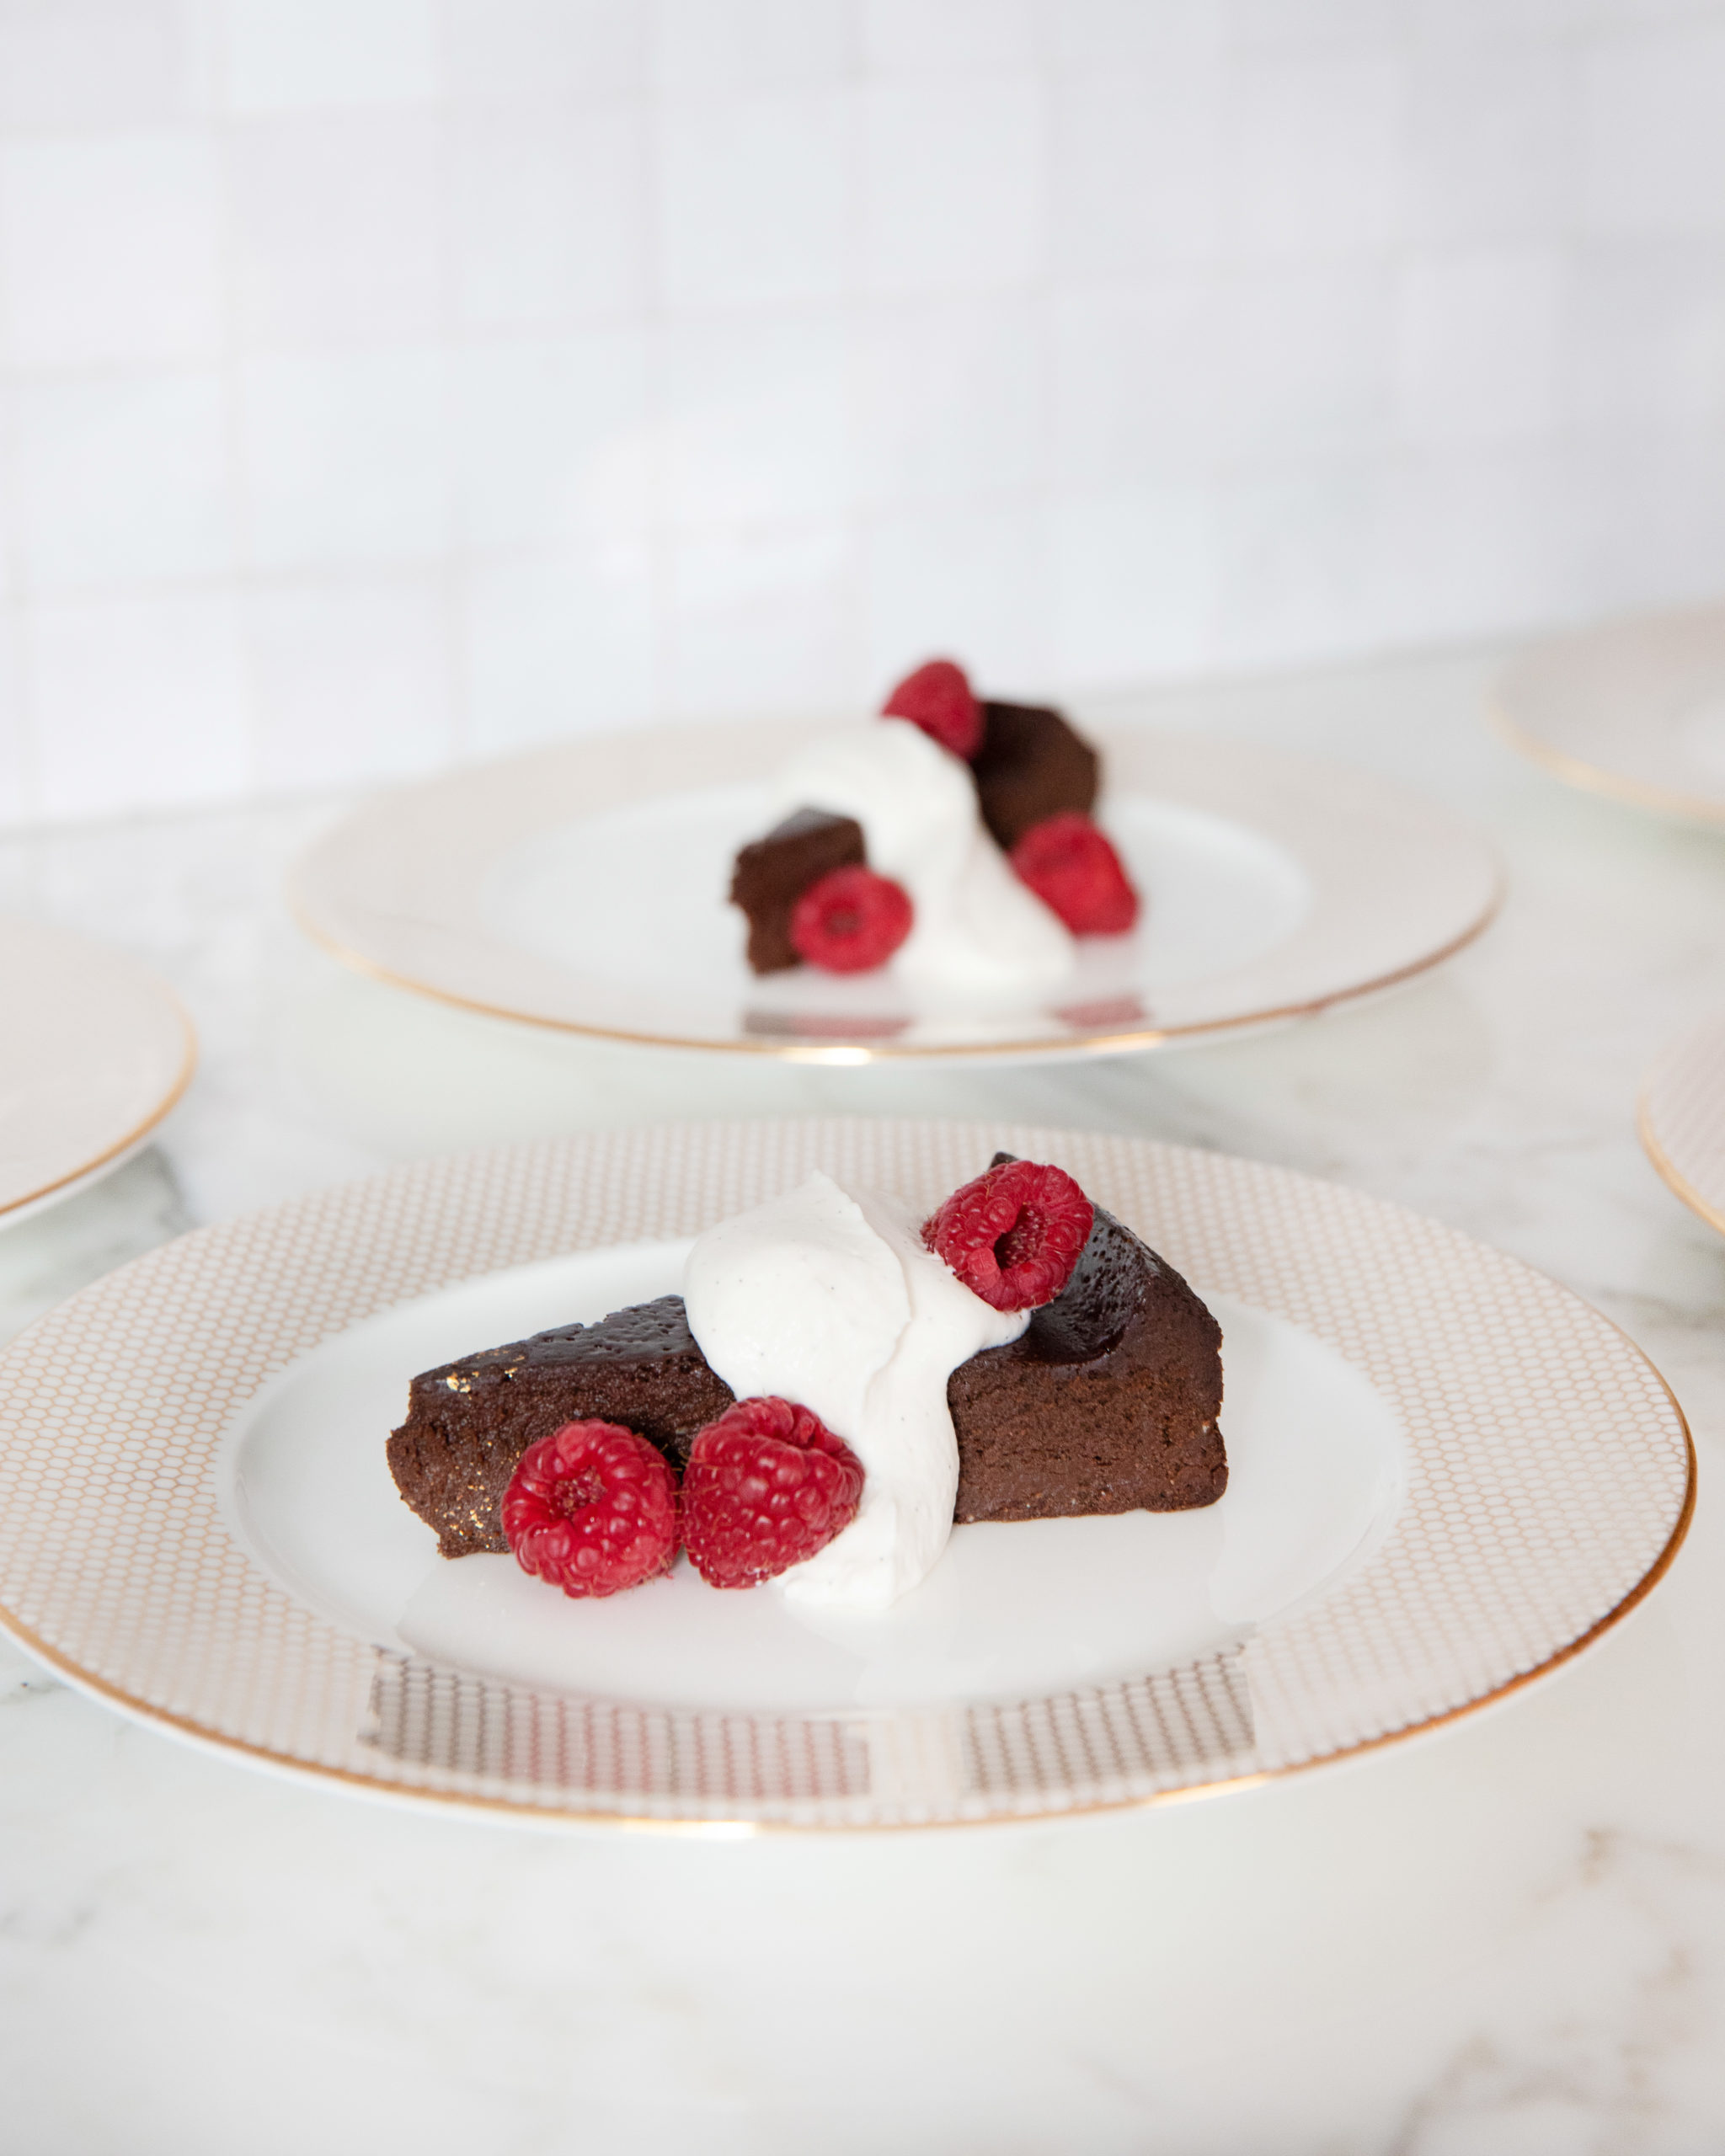 image of flourless chocolate cake plated with raspberries